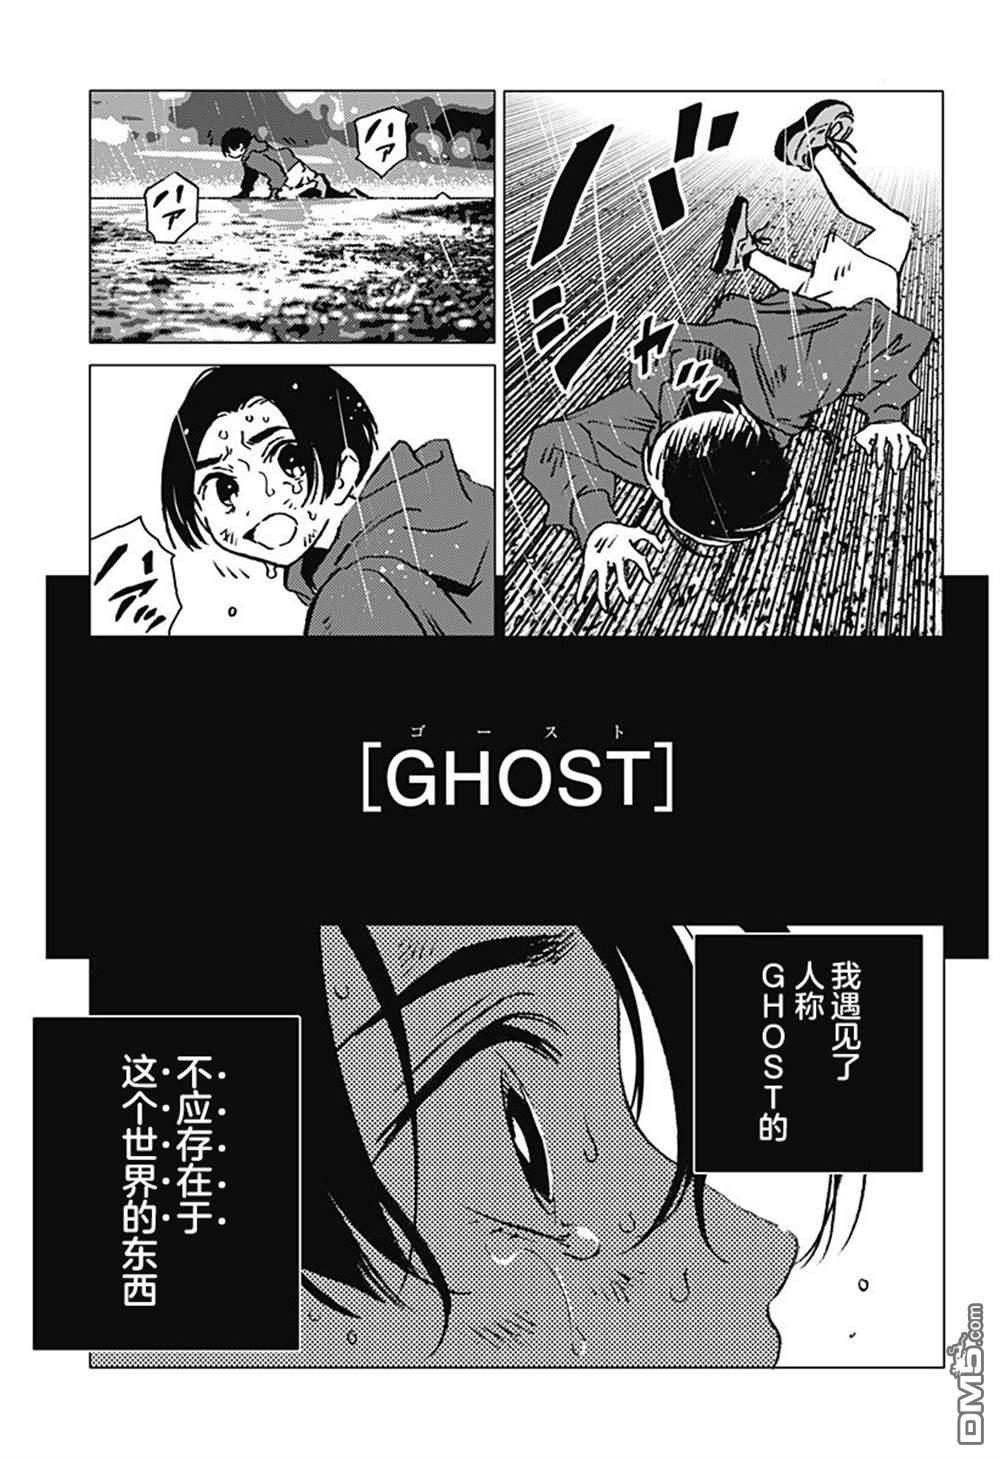 Ghost Fixers - 第1話(1/2) - 4